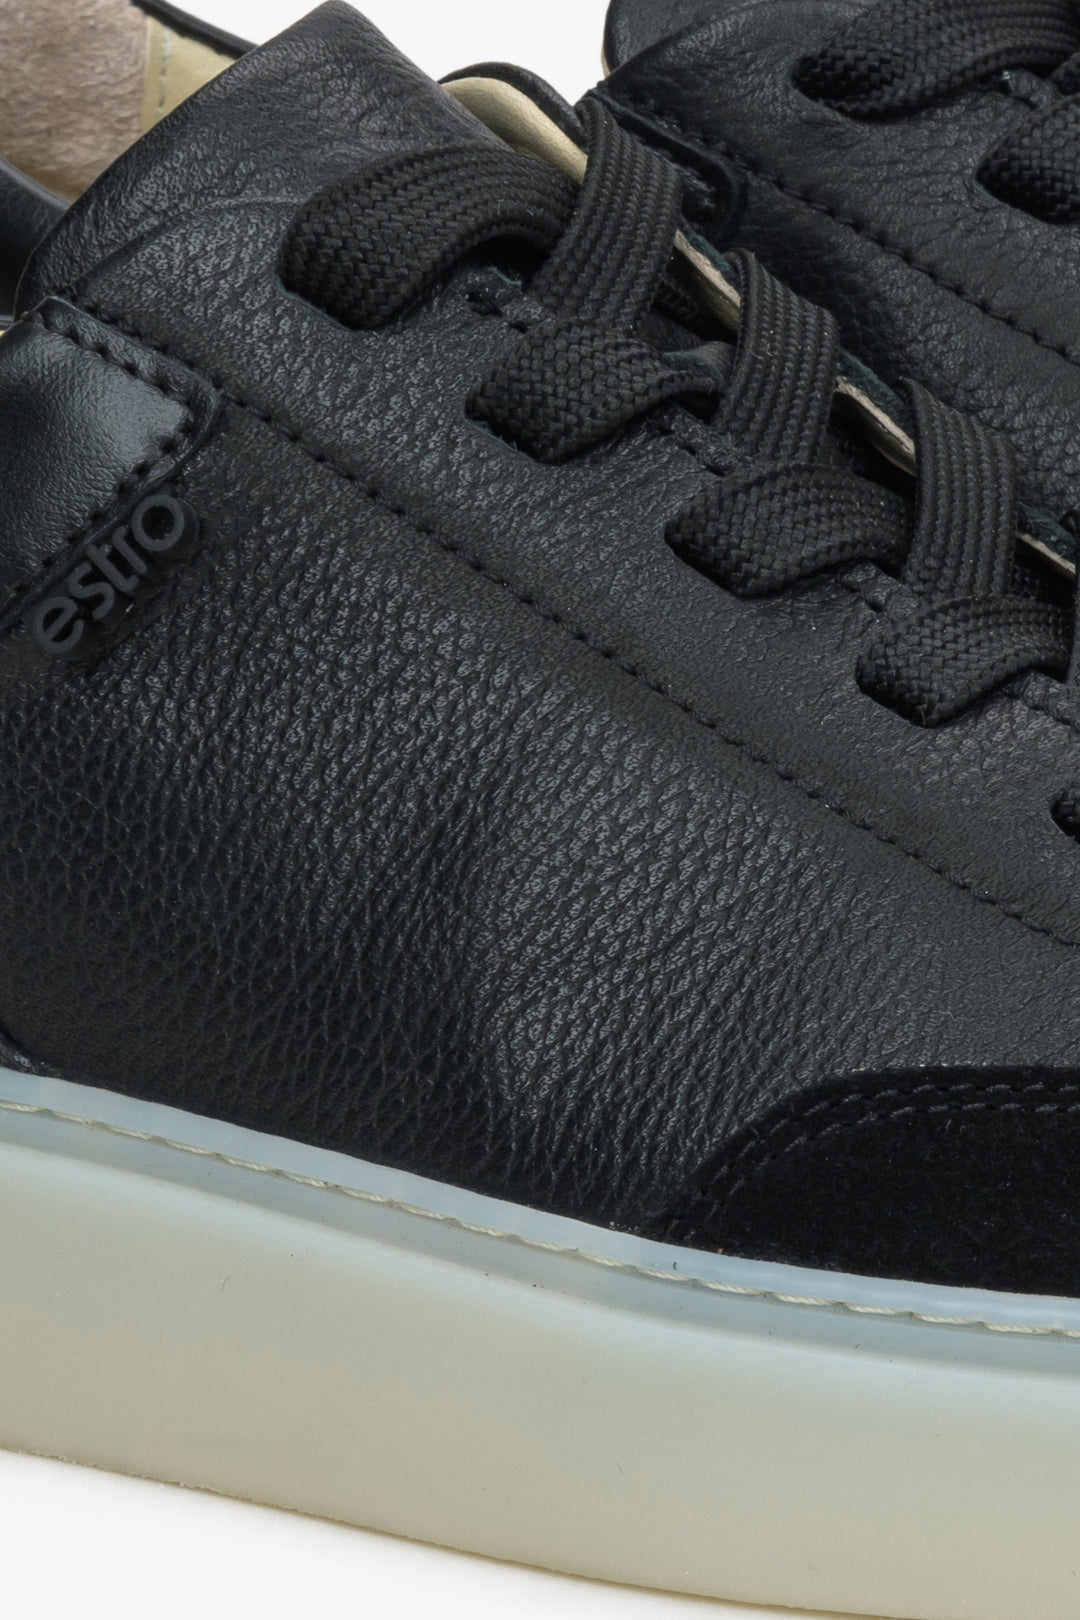 Black women's sneakers made of genuine leather and velour by Estro - close-up on details.